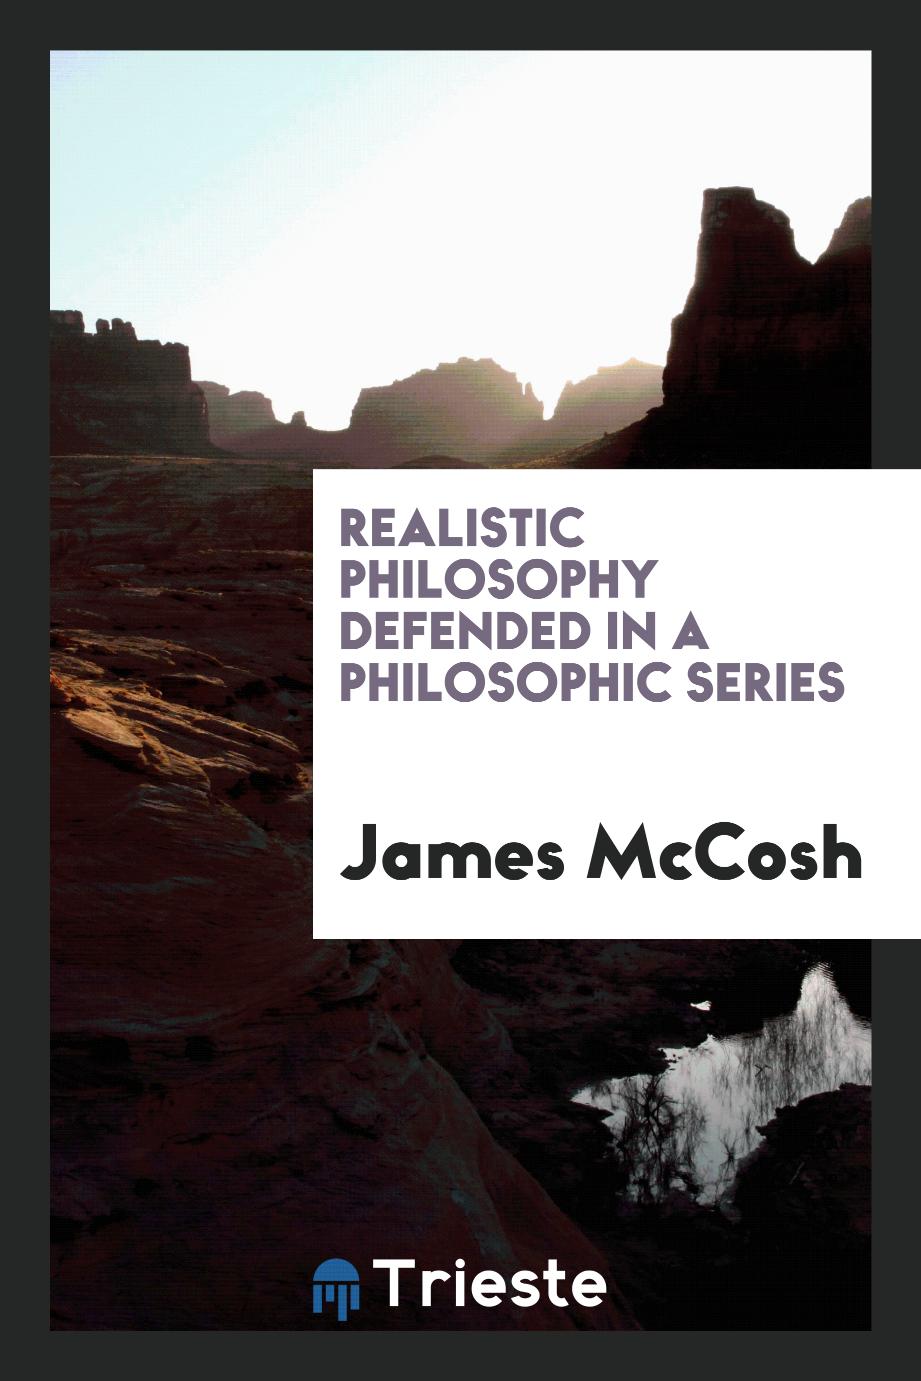 Realistic philosophy defended in a philosophic series